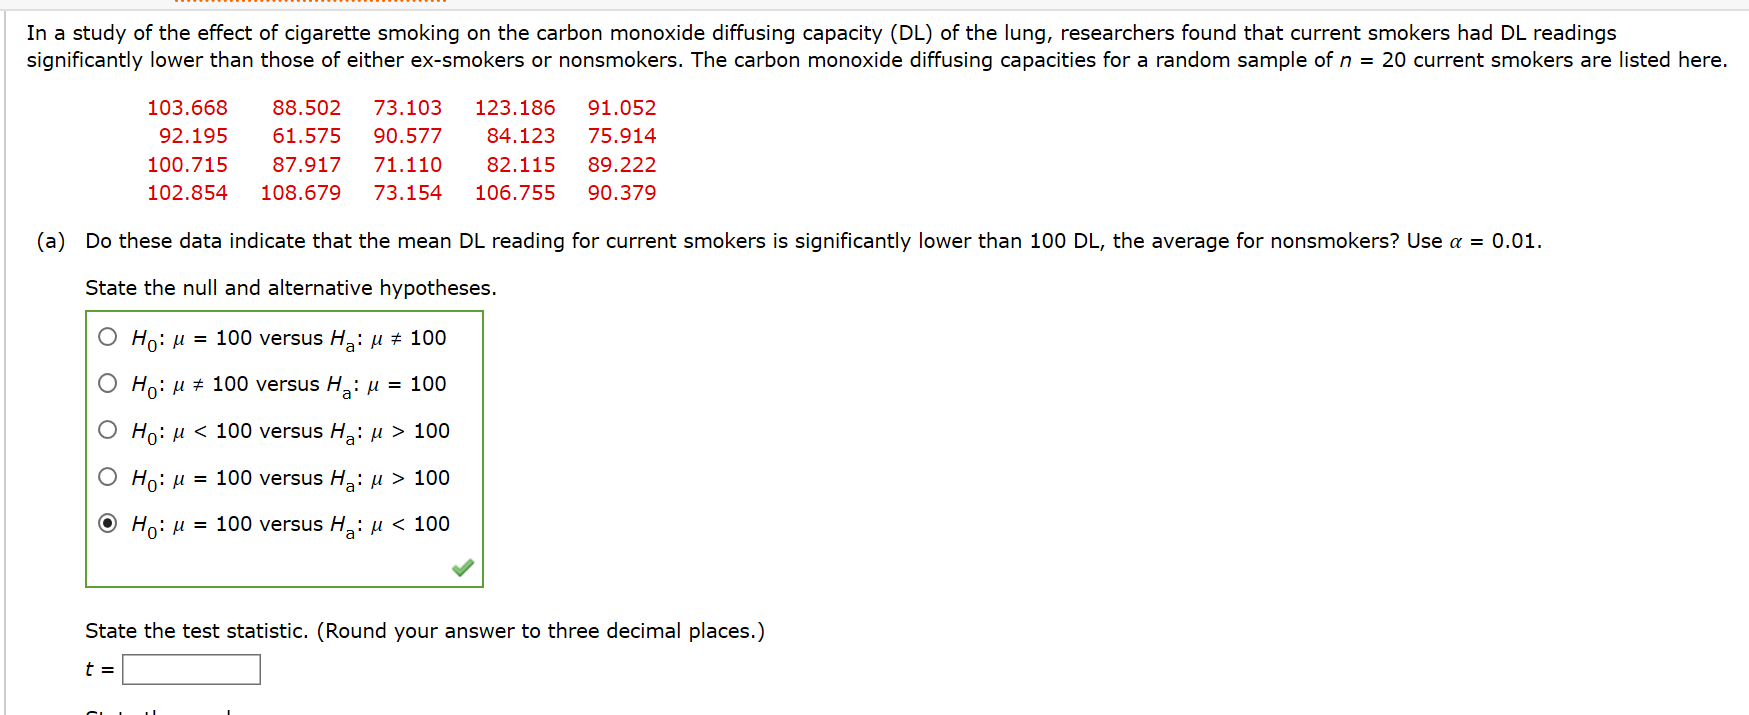 In a study of the effect of cigarette smoking on the carbon monoxide diffusing capacity (DL) of the lung, researchers found that current smokers had DL readings
significantly lower than those of either ex-smokers or nonsmokers. The carbon monoxide diffusing capacities for a random sample of n = 20 current smokers are listed here.
103.668
88.502
73.103
123.186
91.052
92.195
61.575
90.577
84.123
75.914
100.715
87.917
71.110
82.115
89.222
102.854
108.679
73.154
106.755
90.379
(a) Do these data indicate that the mean DL reading for current smokers is significantly lower than 100 DL, the average for nonsmokers? Use a = 0.01.
State the null and alternative hypotheses.
Ho: u = 100 versus H: µ ± 100
O Ho: u + 100 versus H,: µ = 100
O Ho: u < 100 versus H,: u > 100
Ho: u = 100 versus H: µ > 100
O Ho: u = 100 versus H,: µ < 100
State the test statistic. (Round your answer to three decimal places.)
